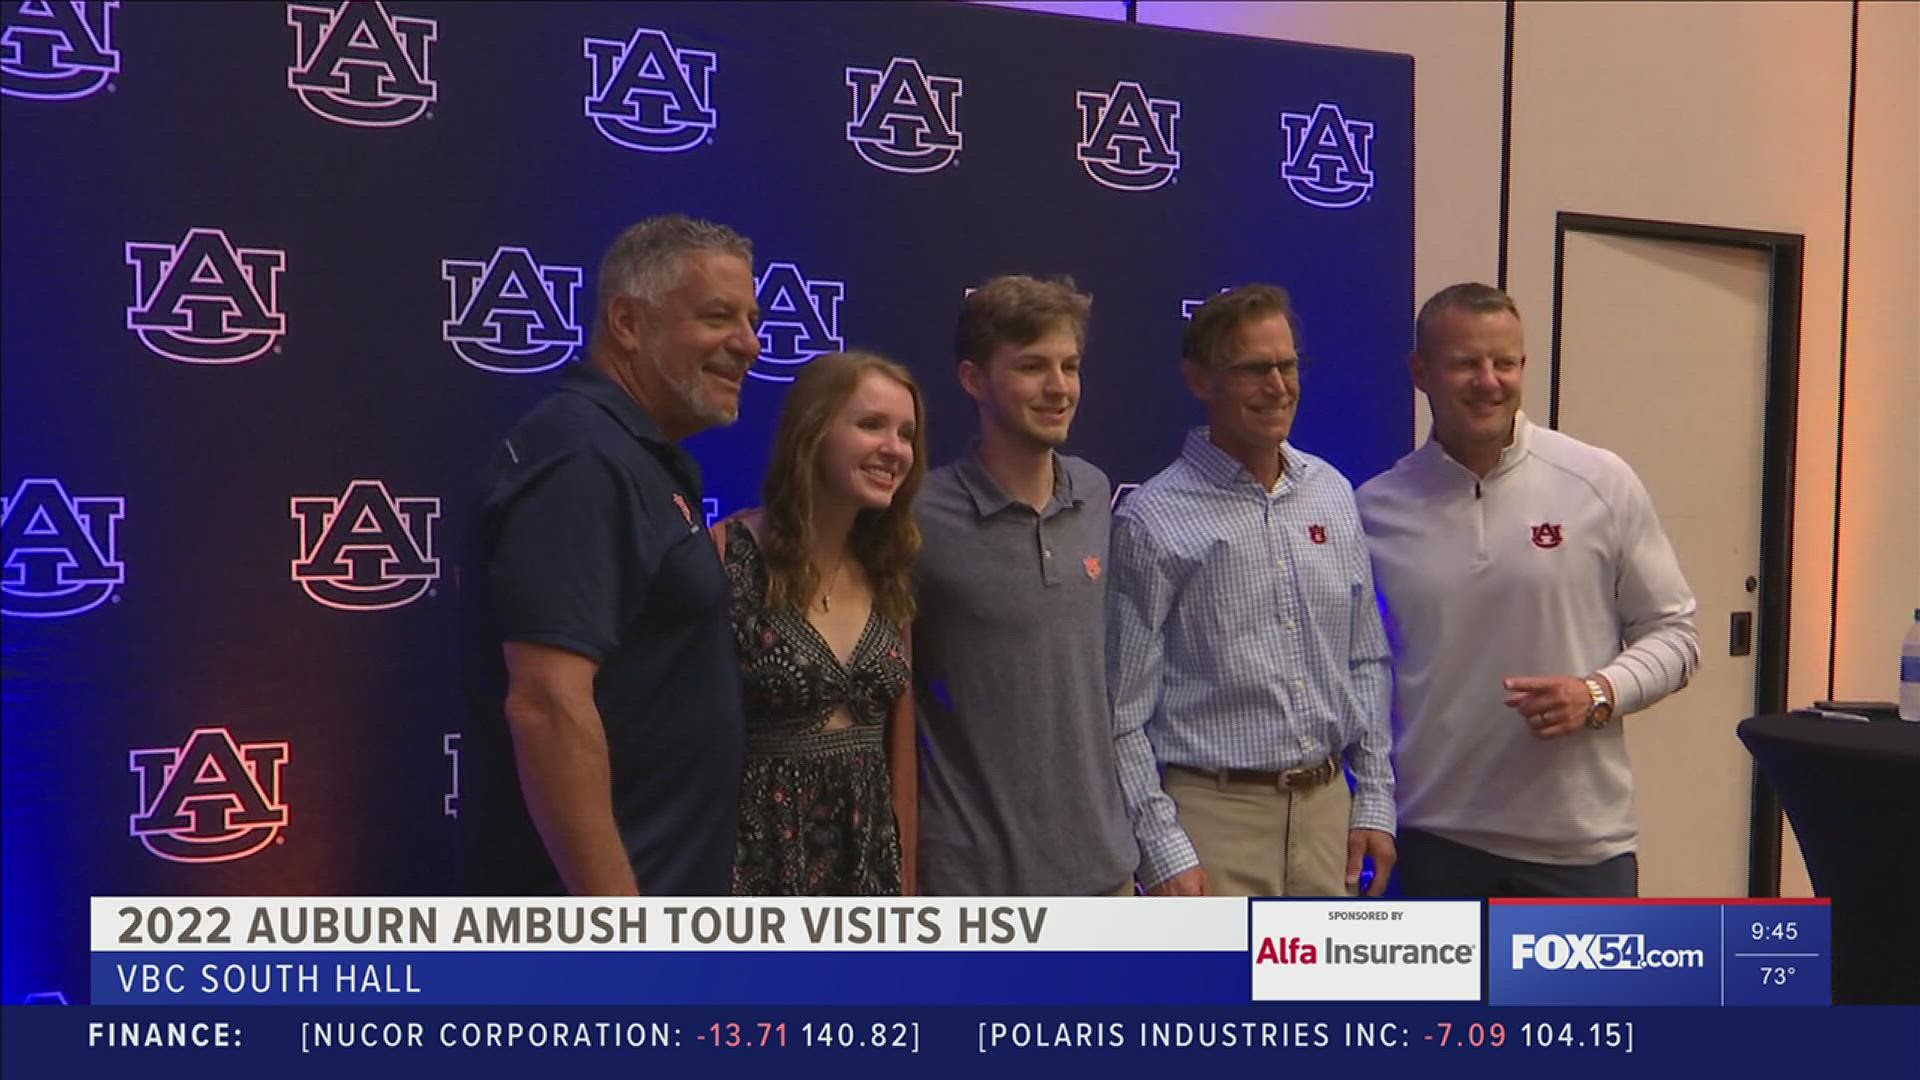 Bruce Peal and Bryan Harsin made their way to Huntsville to speak with Tiger fans on the annual Auburn AMBUSH Tour.